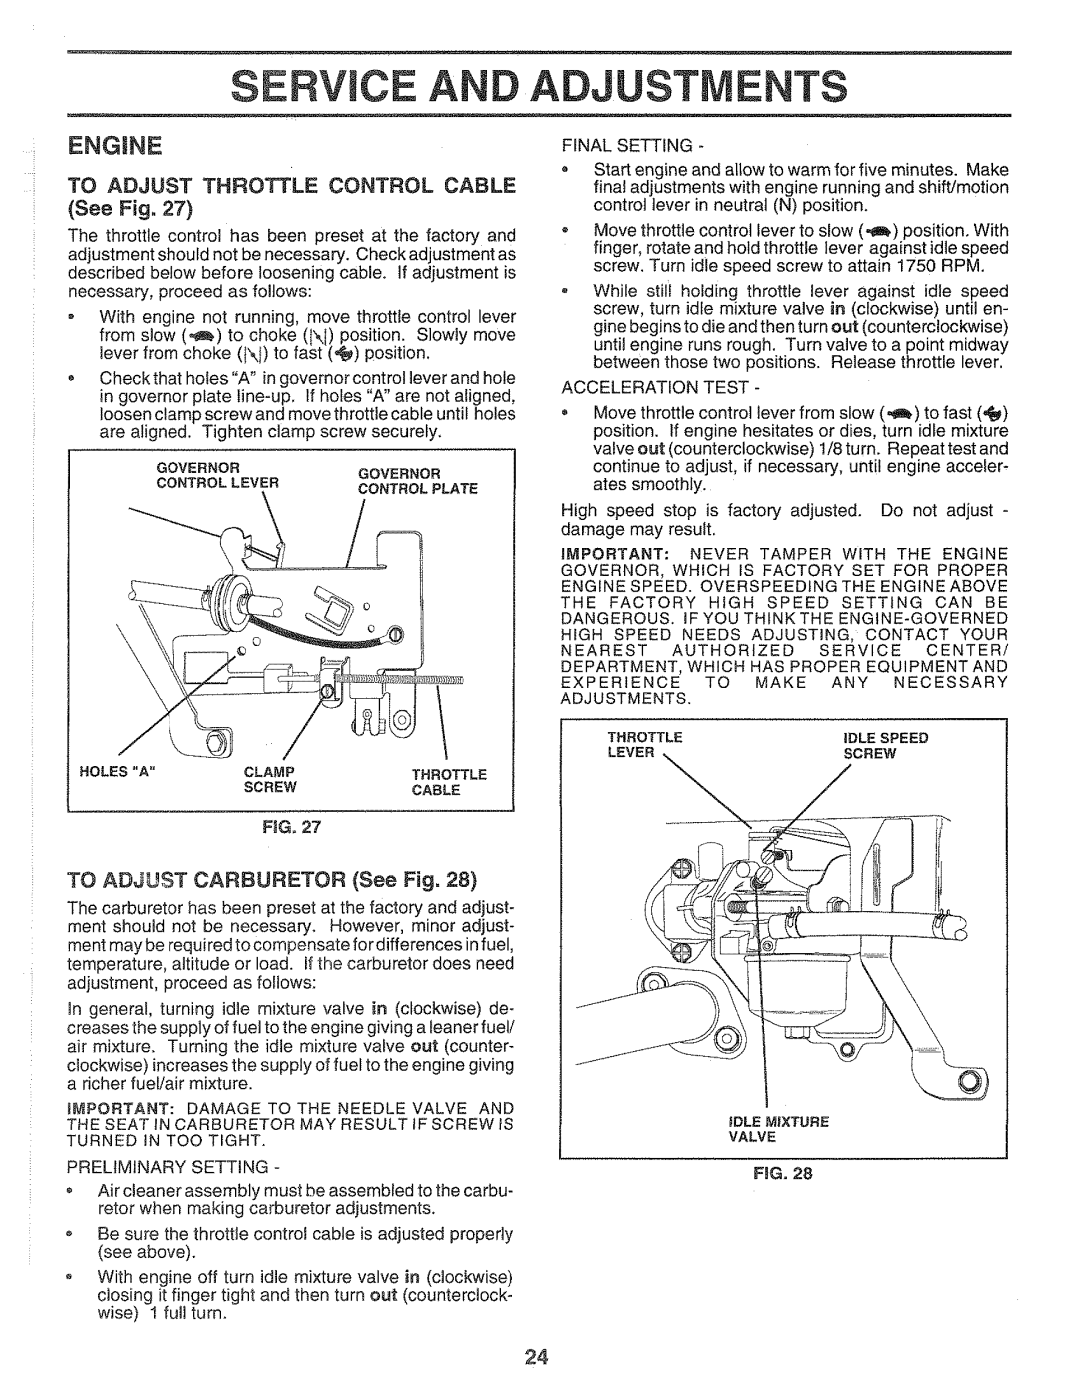 Sears 917.2565 Service A, Ajustments, Engine, To Adjust Throttle Control Cable, TO ADJUST CARBURETOR See Fig, Screw 